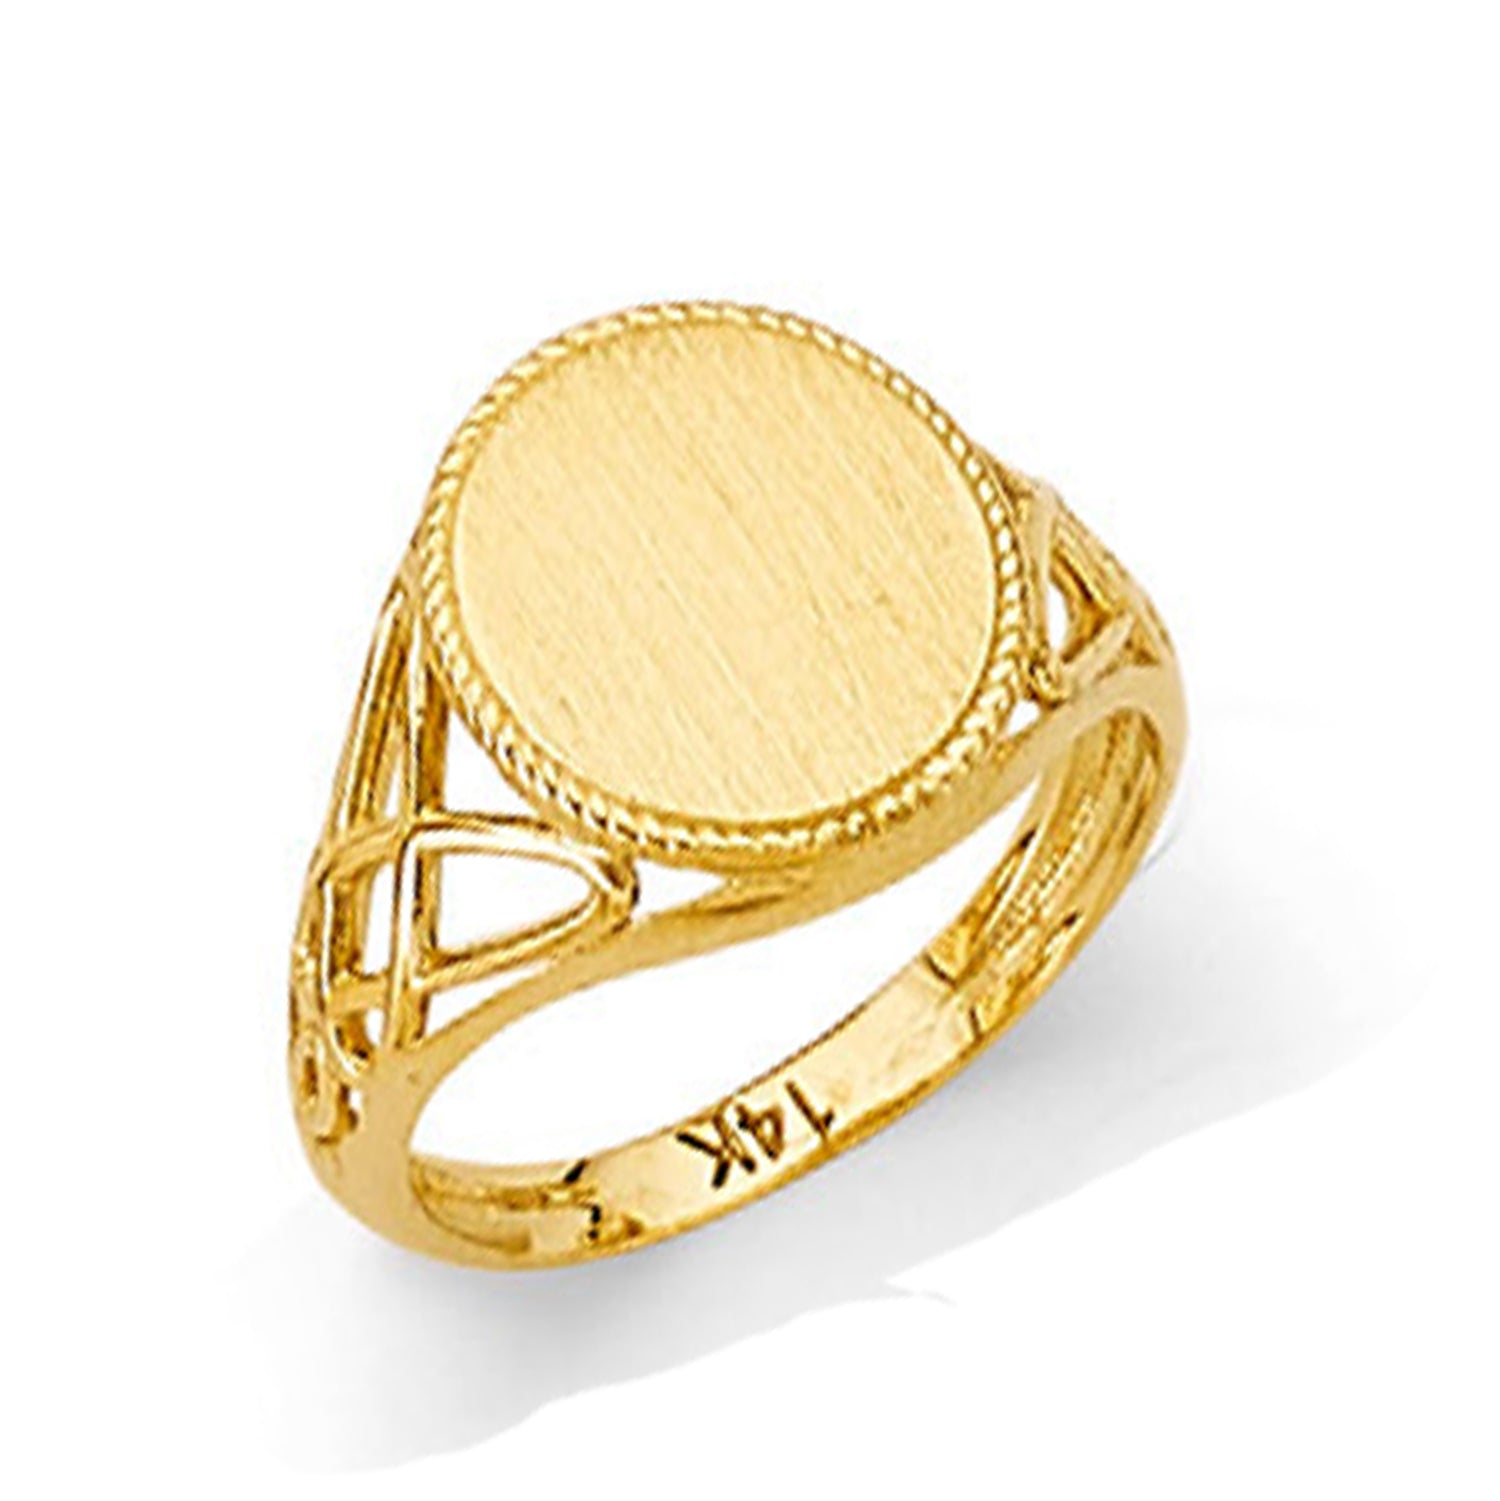 Filigree Round Signet Ring in Solid Gold 